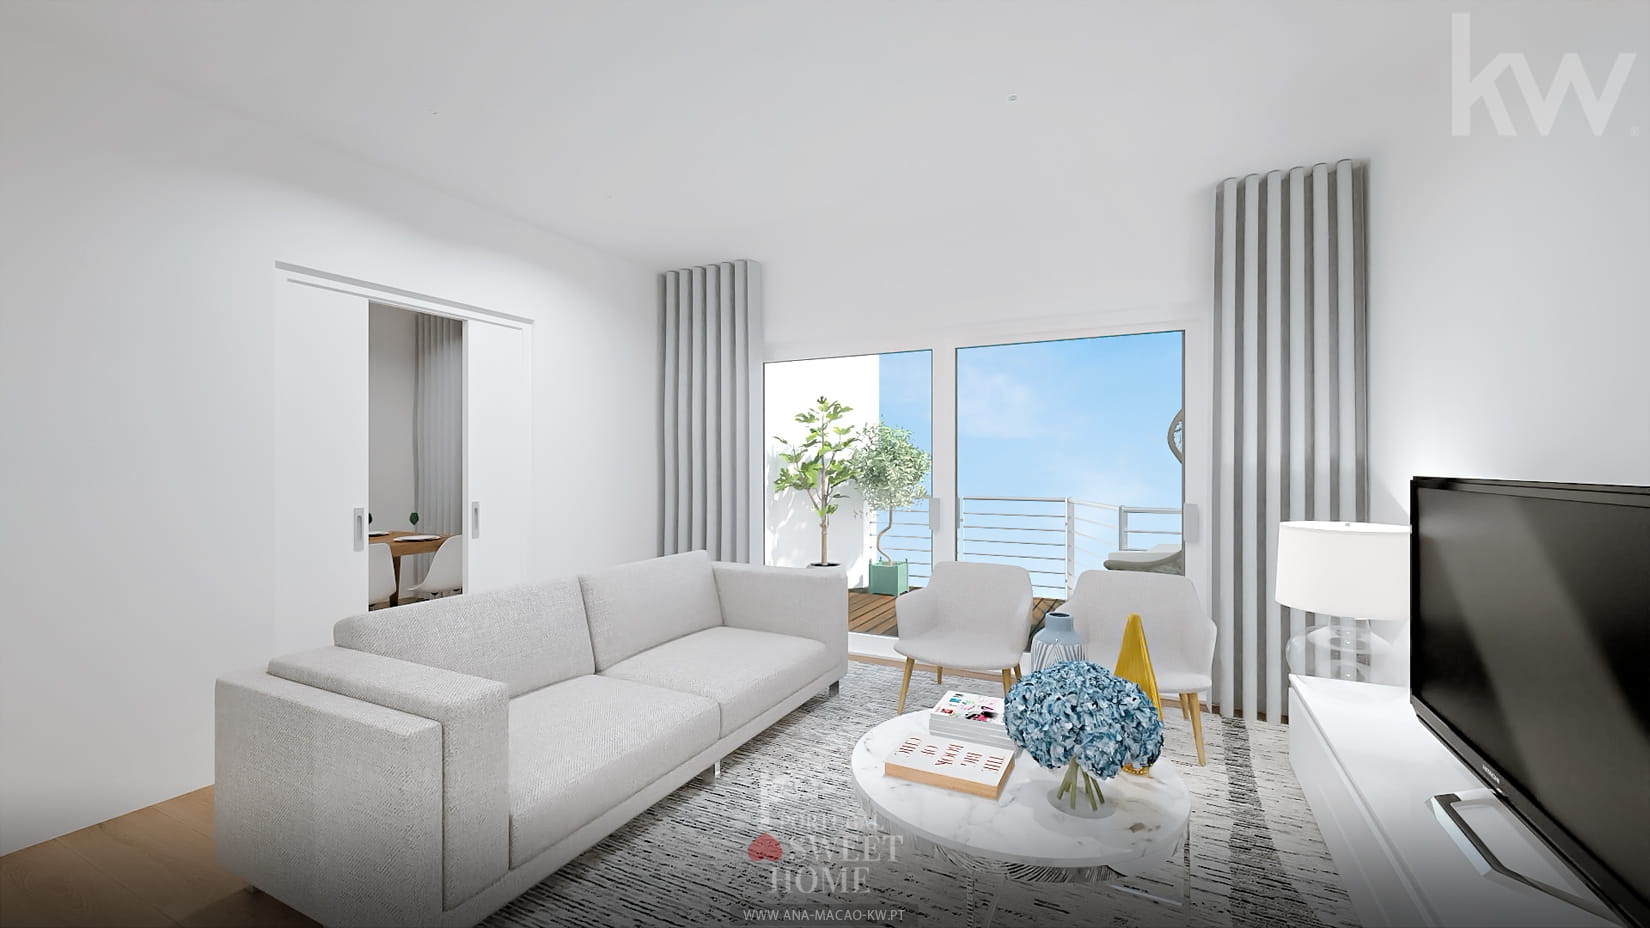 Large living room with sea view (22.4 m2)